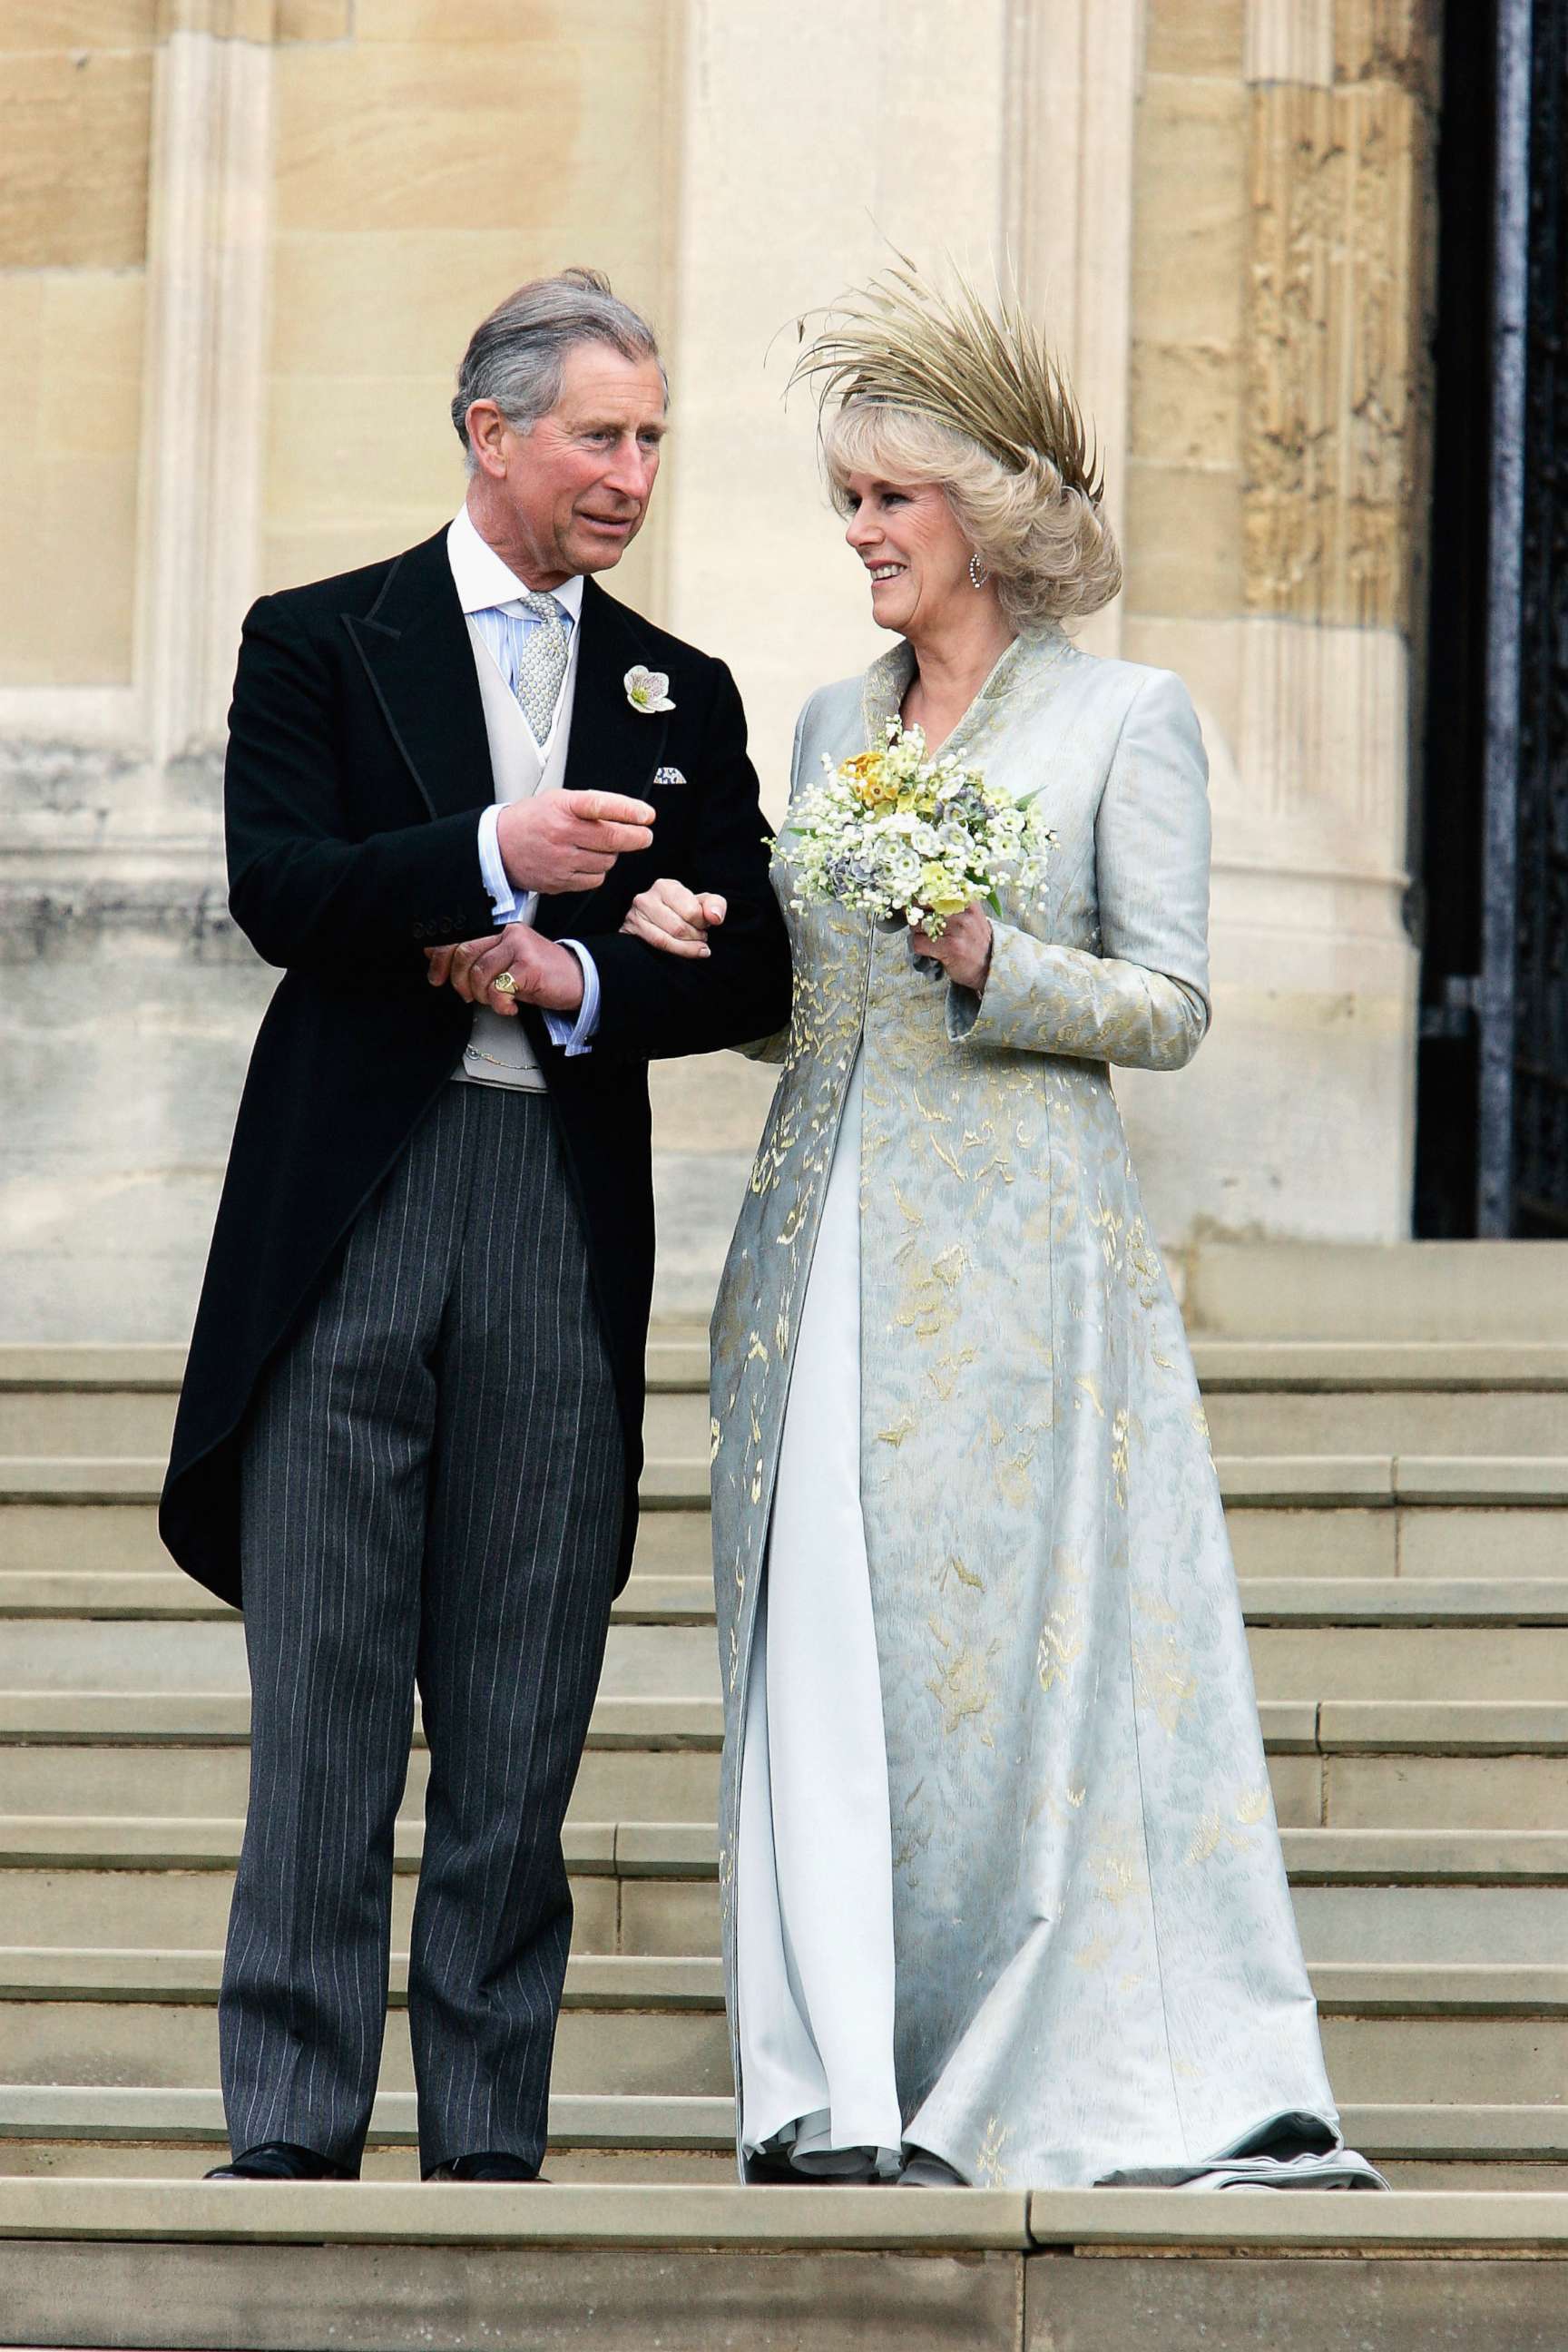 PHOTO: Prince Charles, and Camilla leave the Service of Prayer and Dedication blessing their marriage at Windsor Castle on April 9, 2005 in Berkshire, England. 